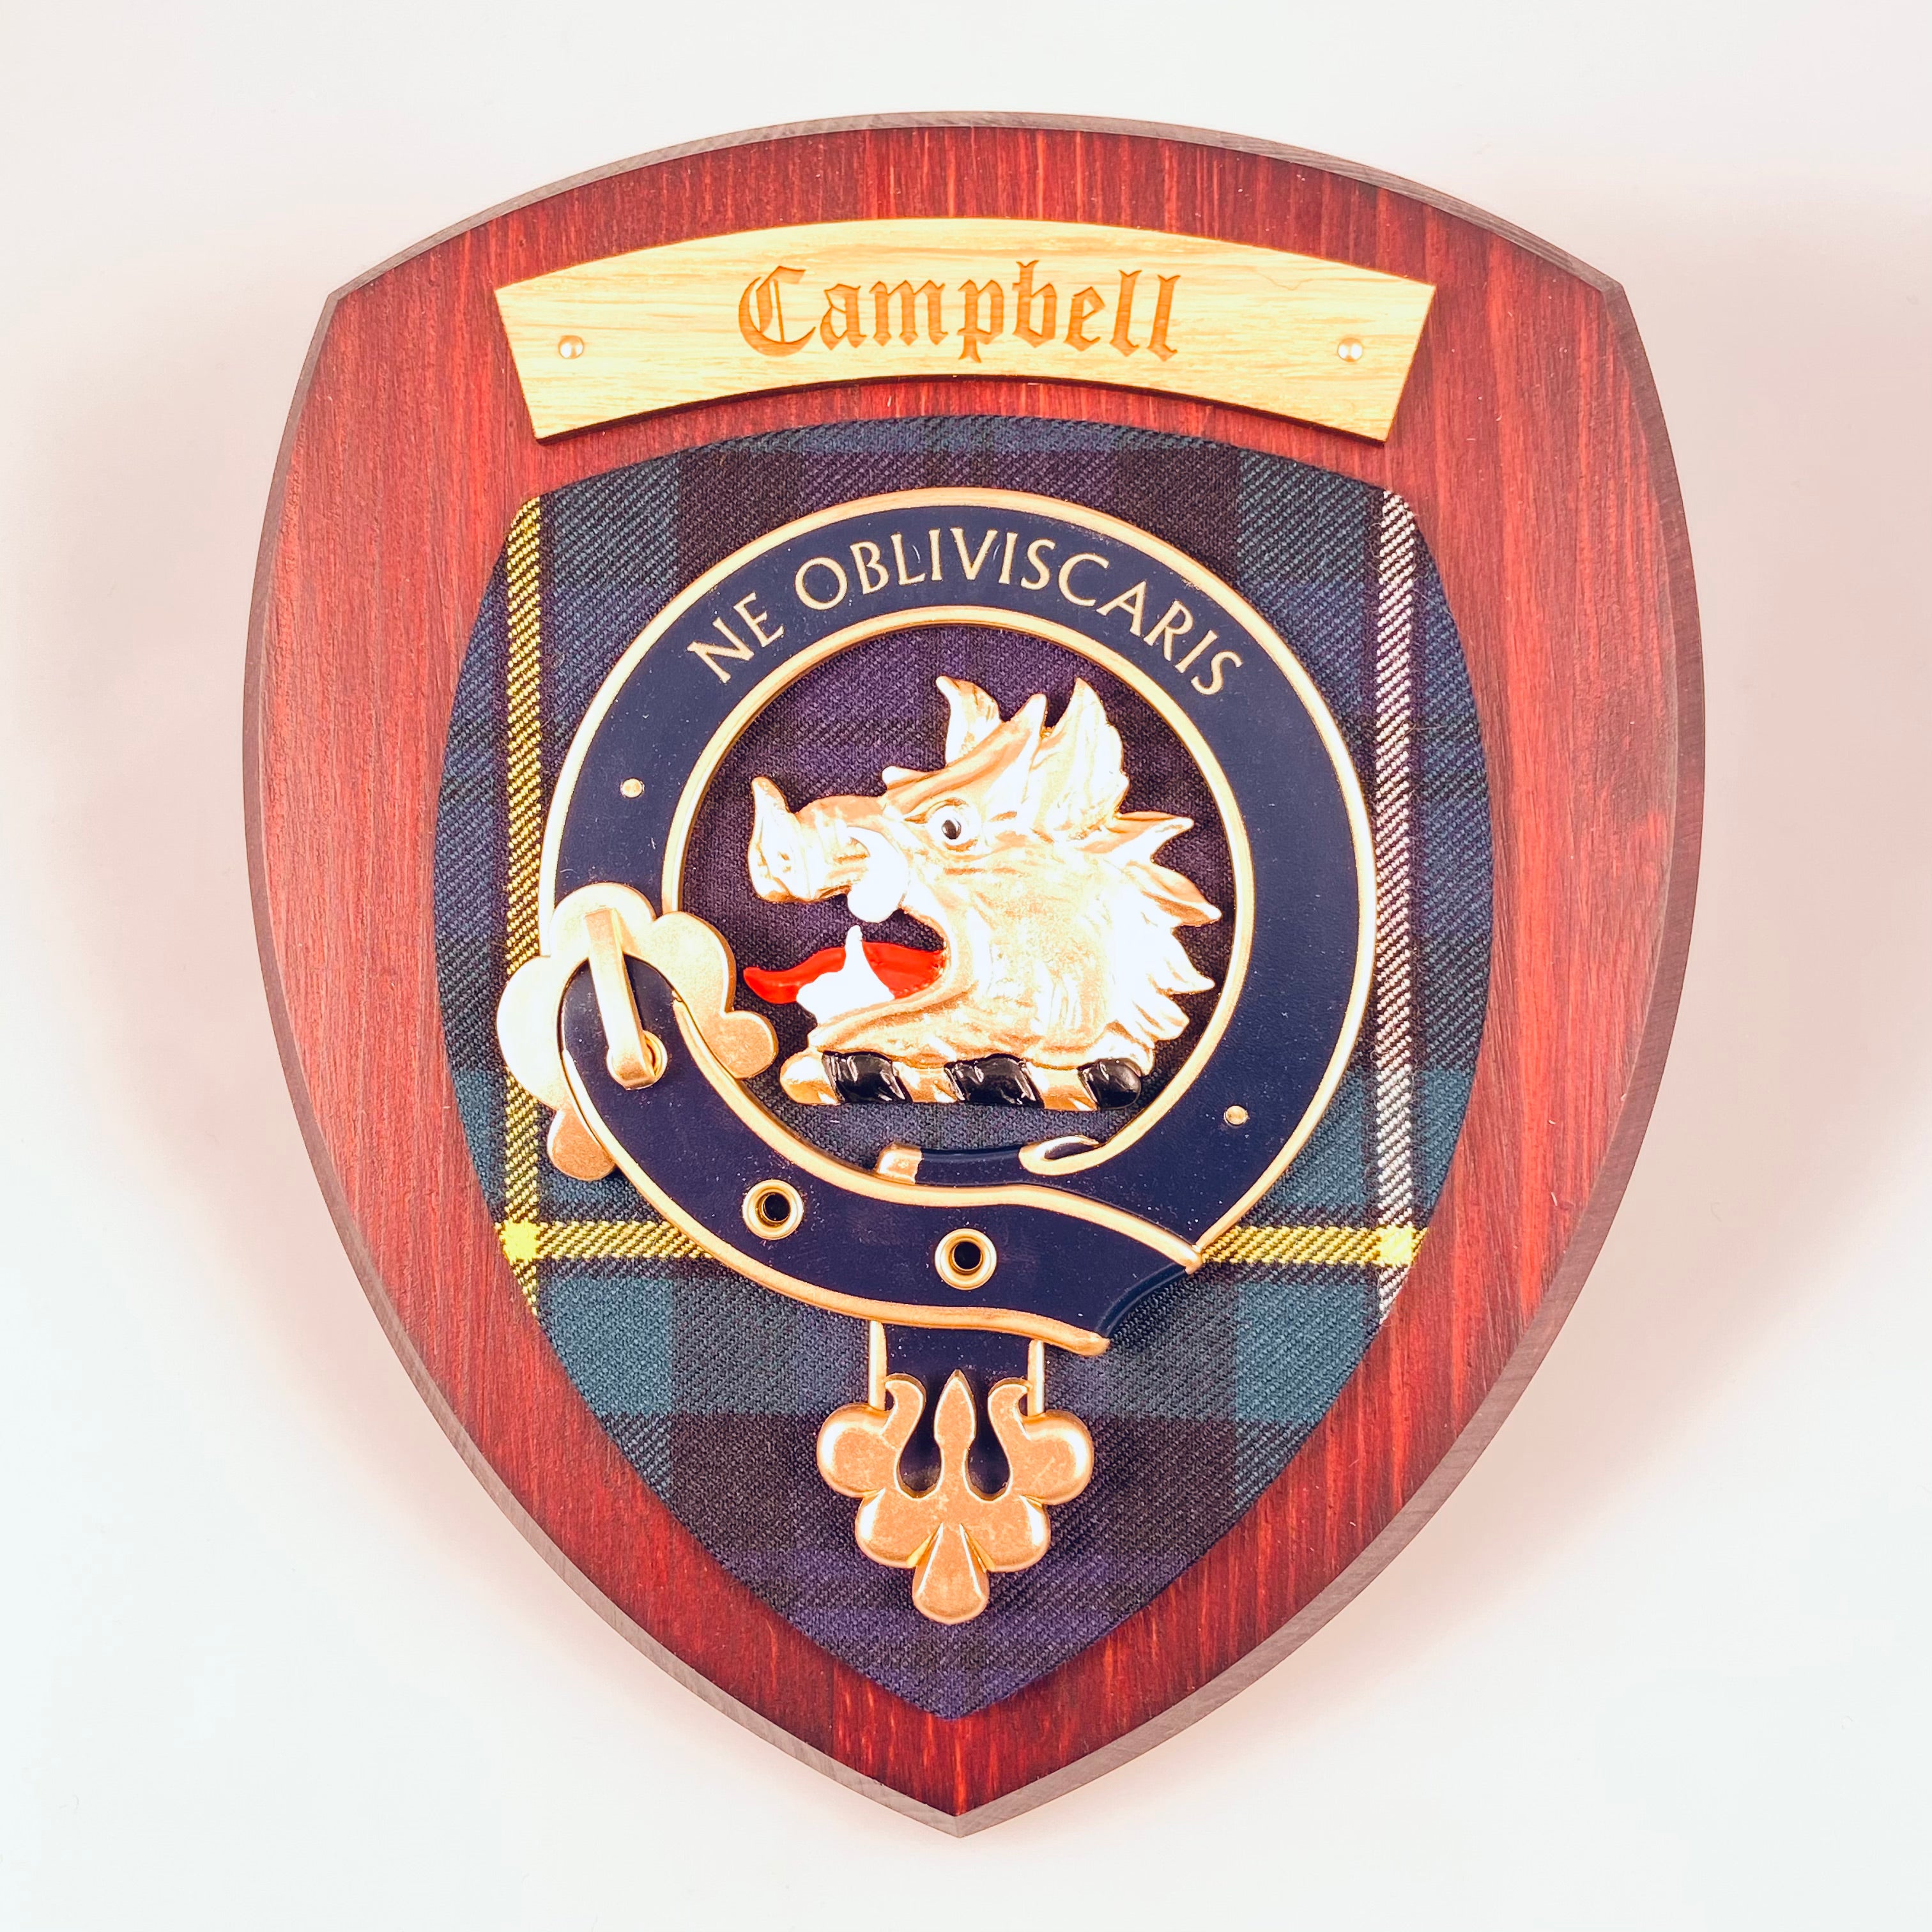 Clan Campbell Crest & Coats of Arms